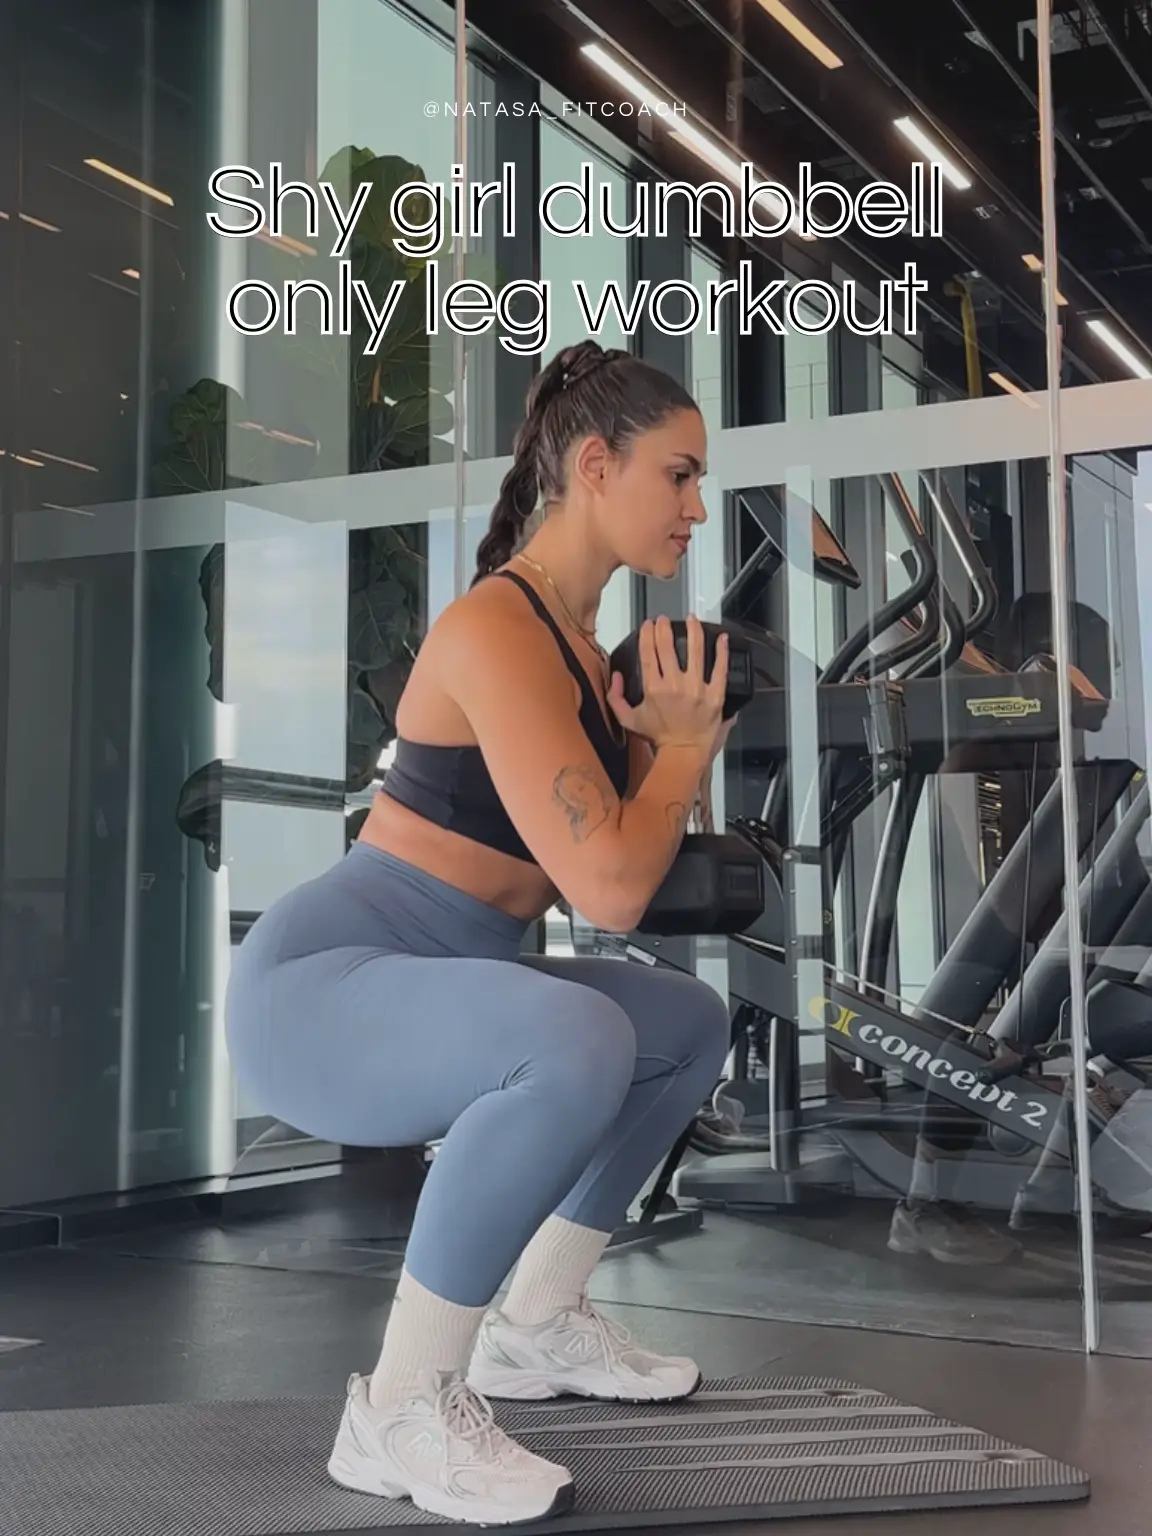 4 exercises to sculpt your back, hourglass, Gallery posted by  Natasa_fitcoach